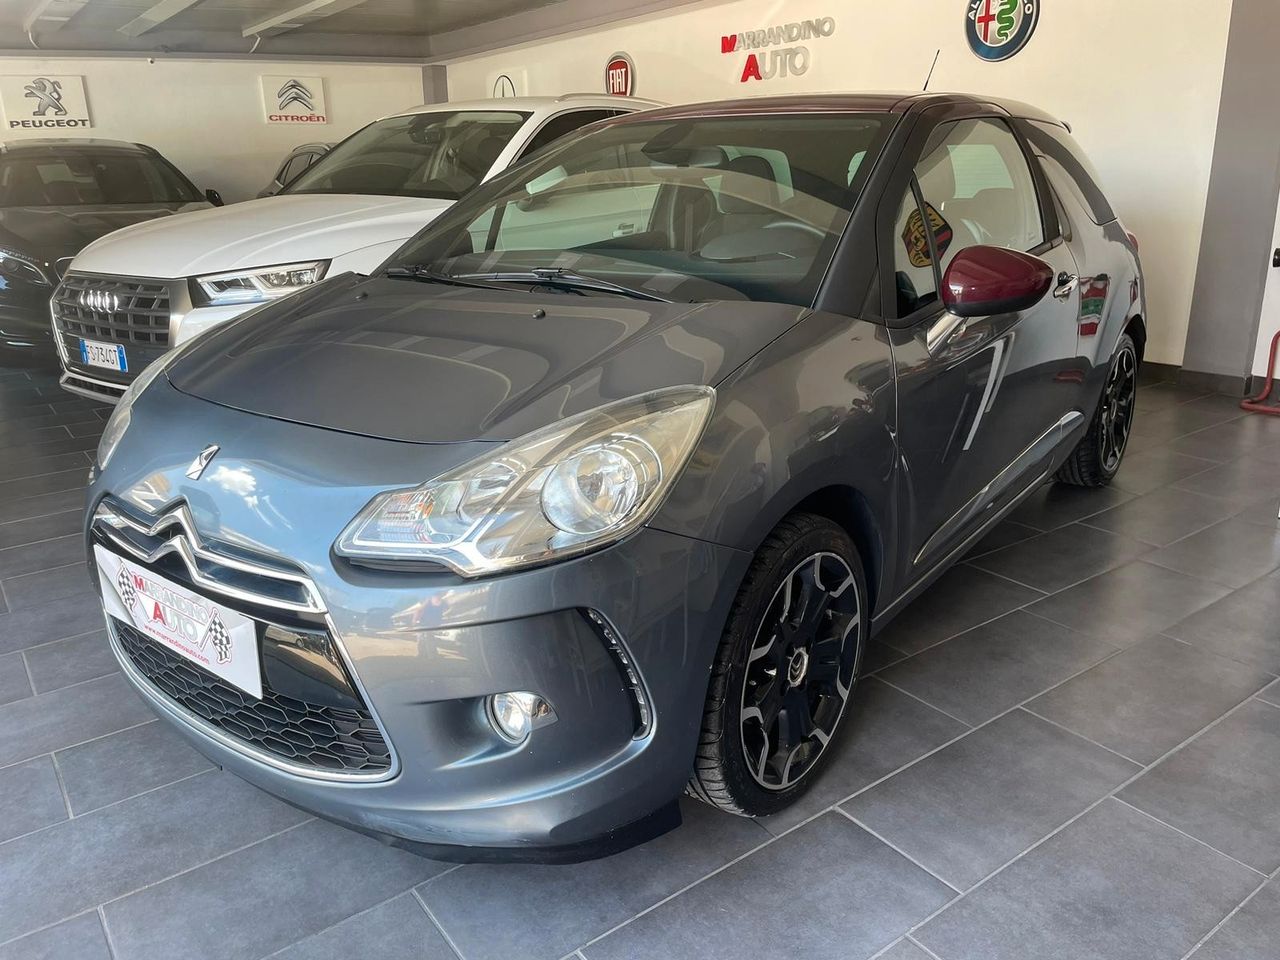 Citroen Ds3 1.6 HDi 110 Exclusive Style